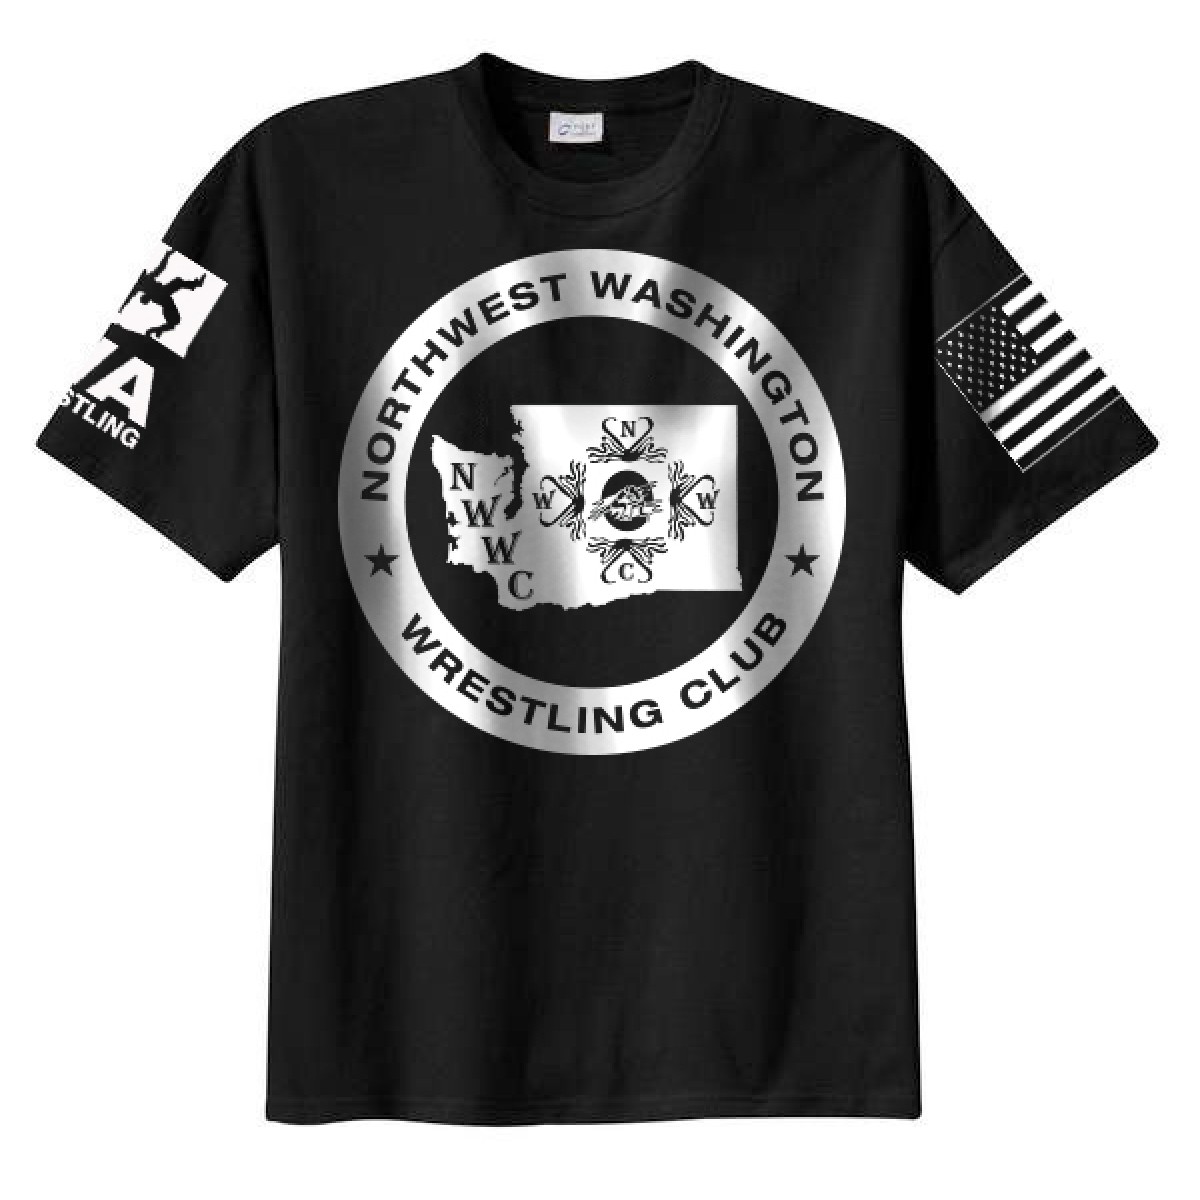 NWWC Black T-shirt With White Logo On The Front-Black-S